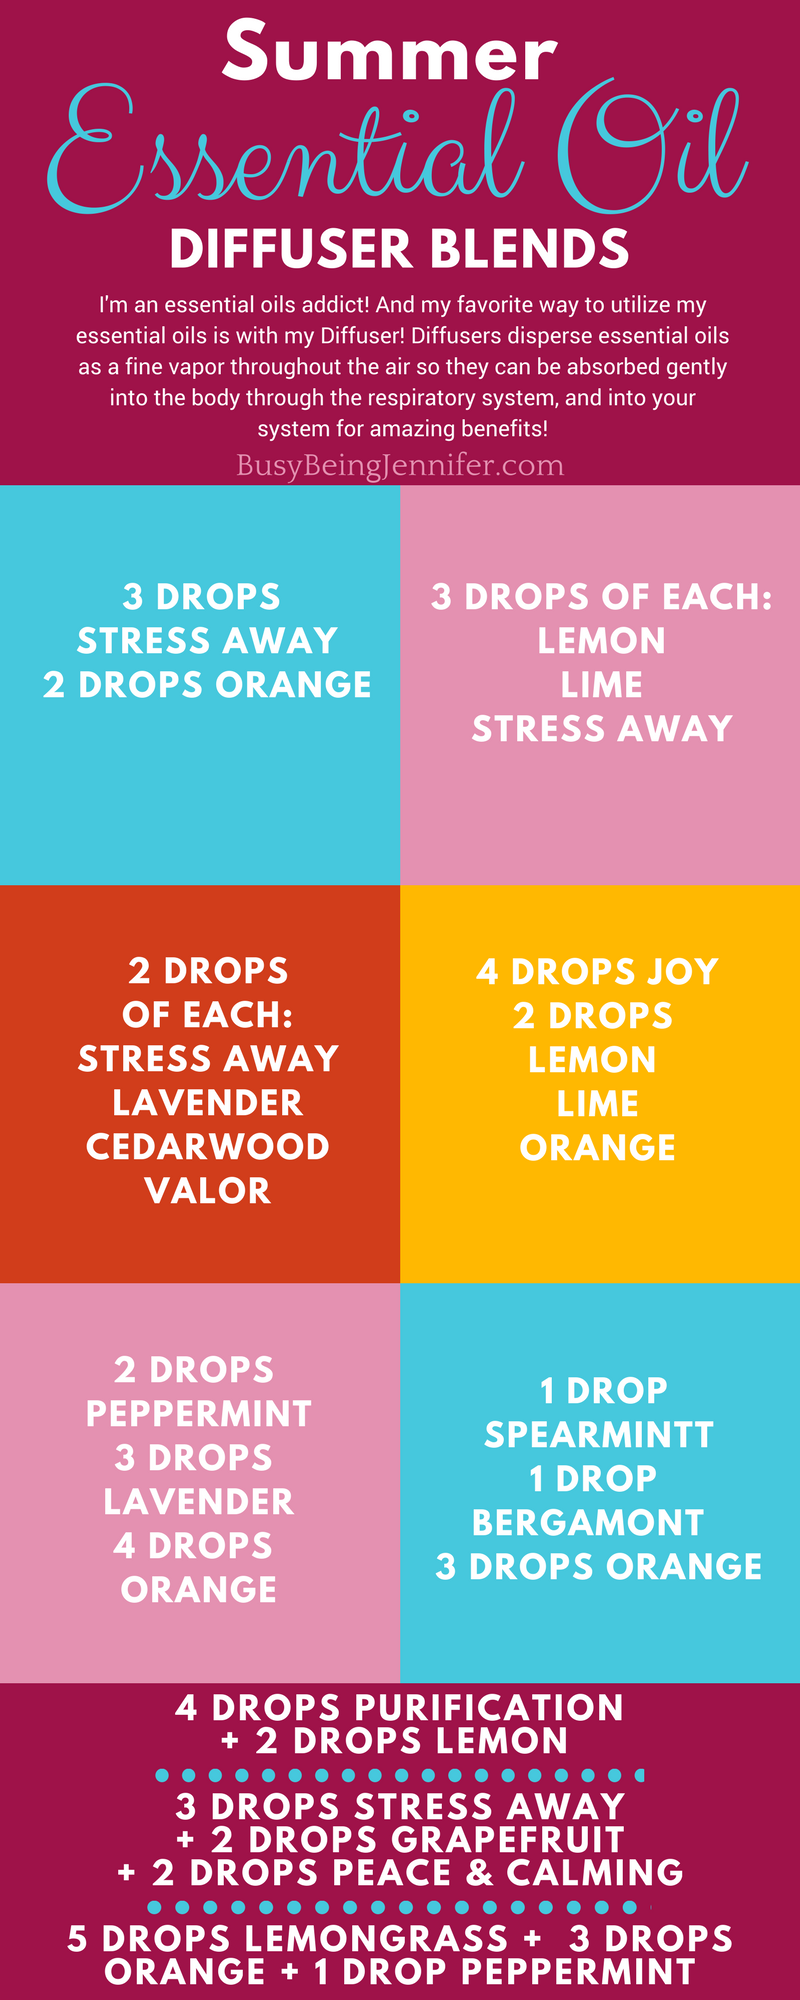 Essential Oil Diffuser Blends for Summer